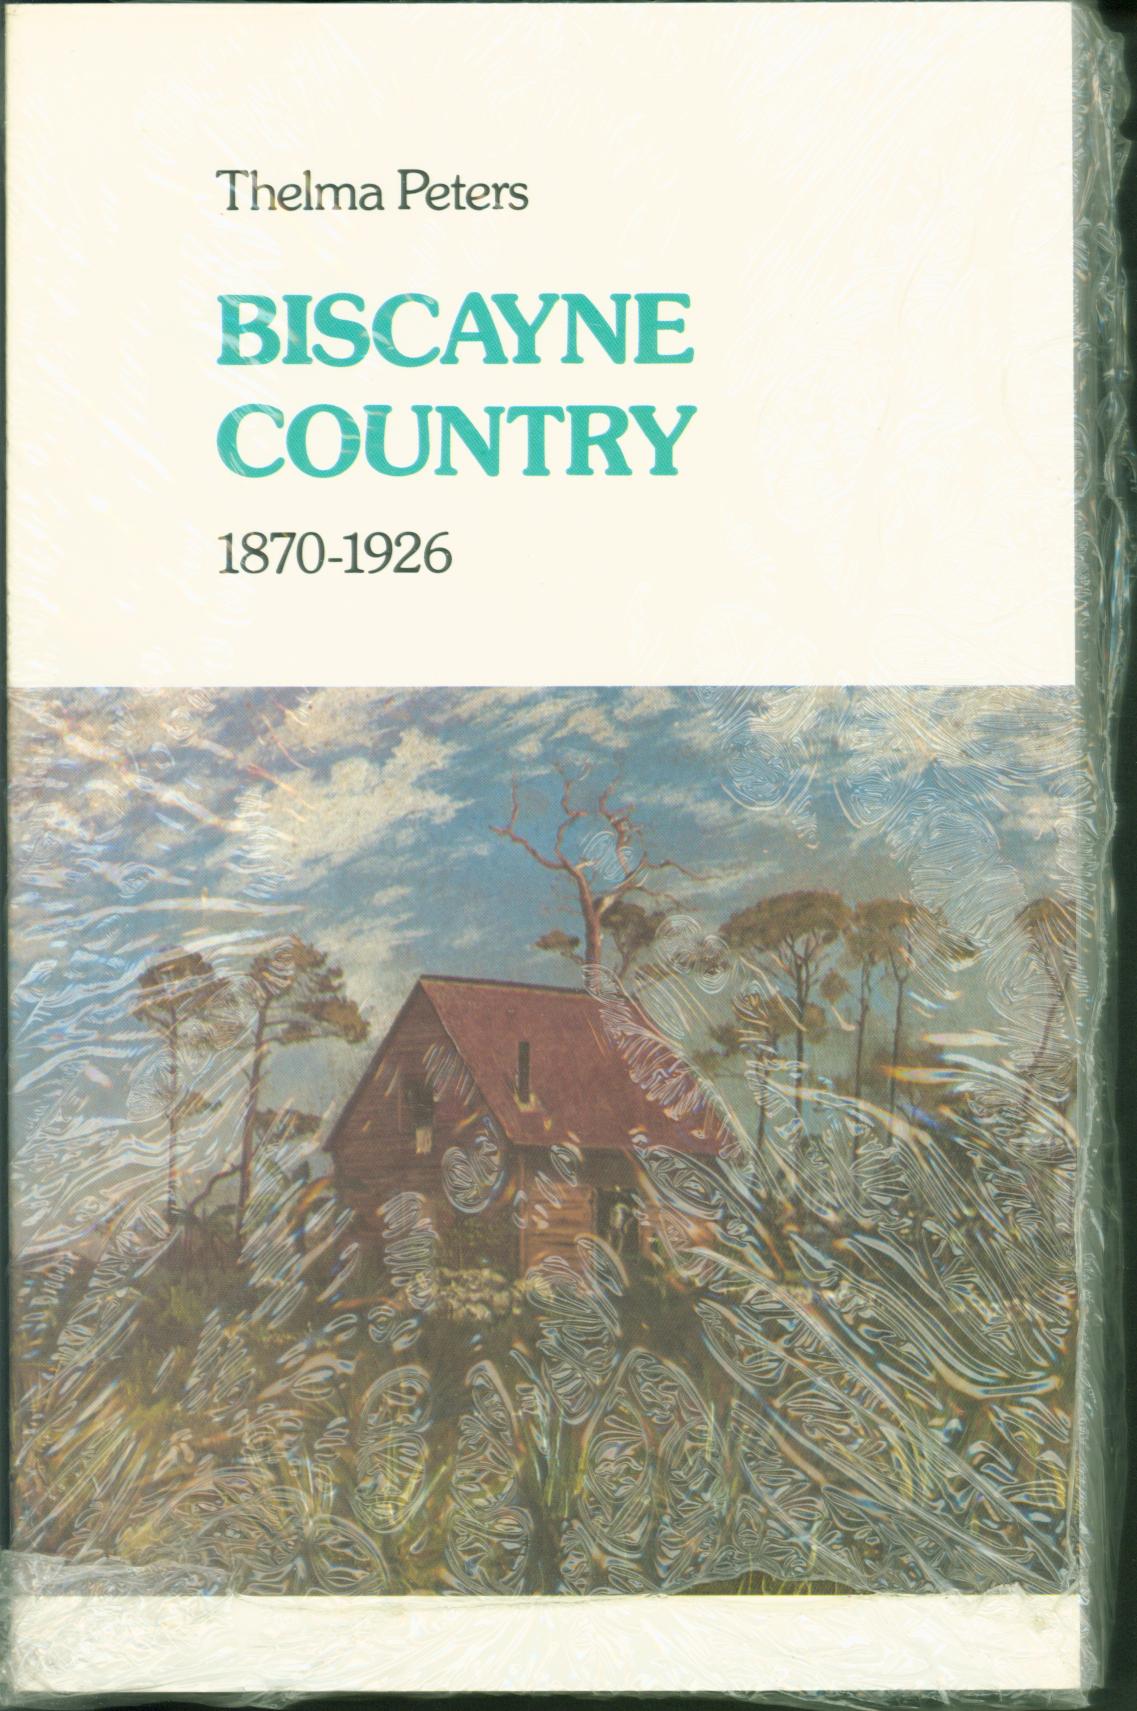 BISCAYNE COUNTRY: 1870-1926.